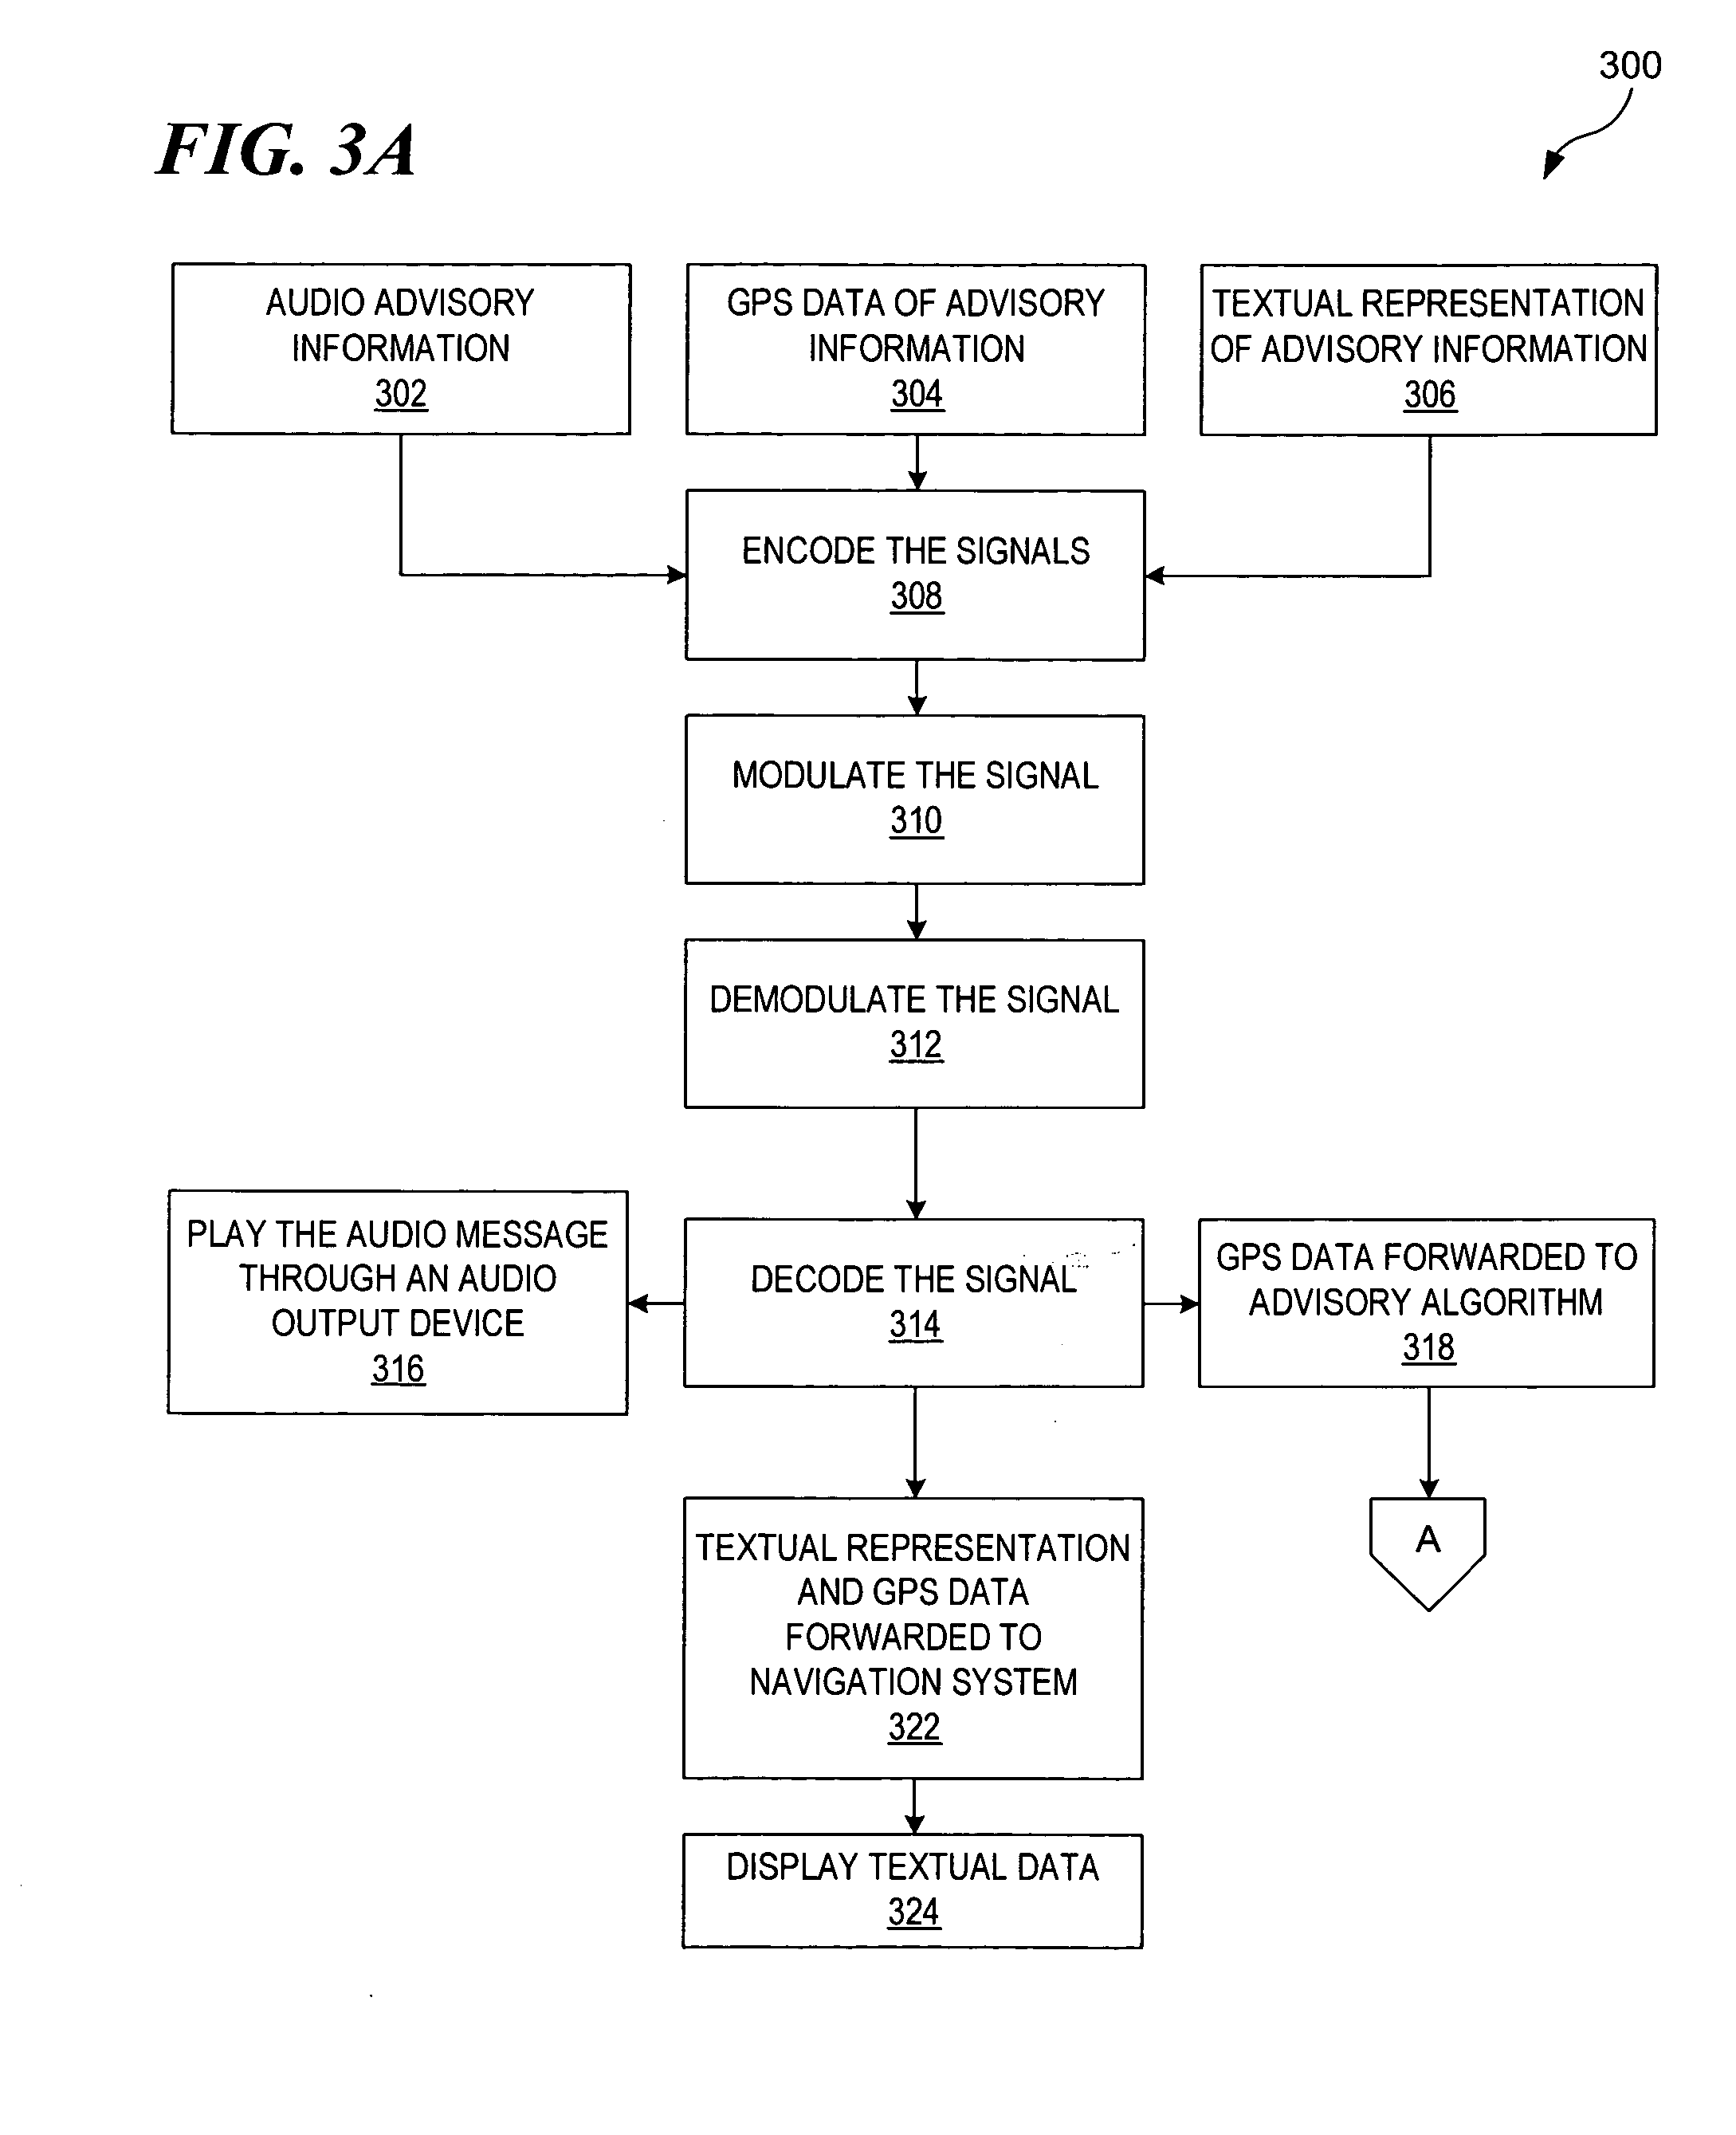 Method and system for automated incident traffic reporting and dynamic routing